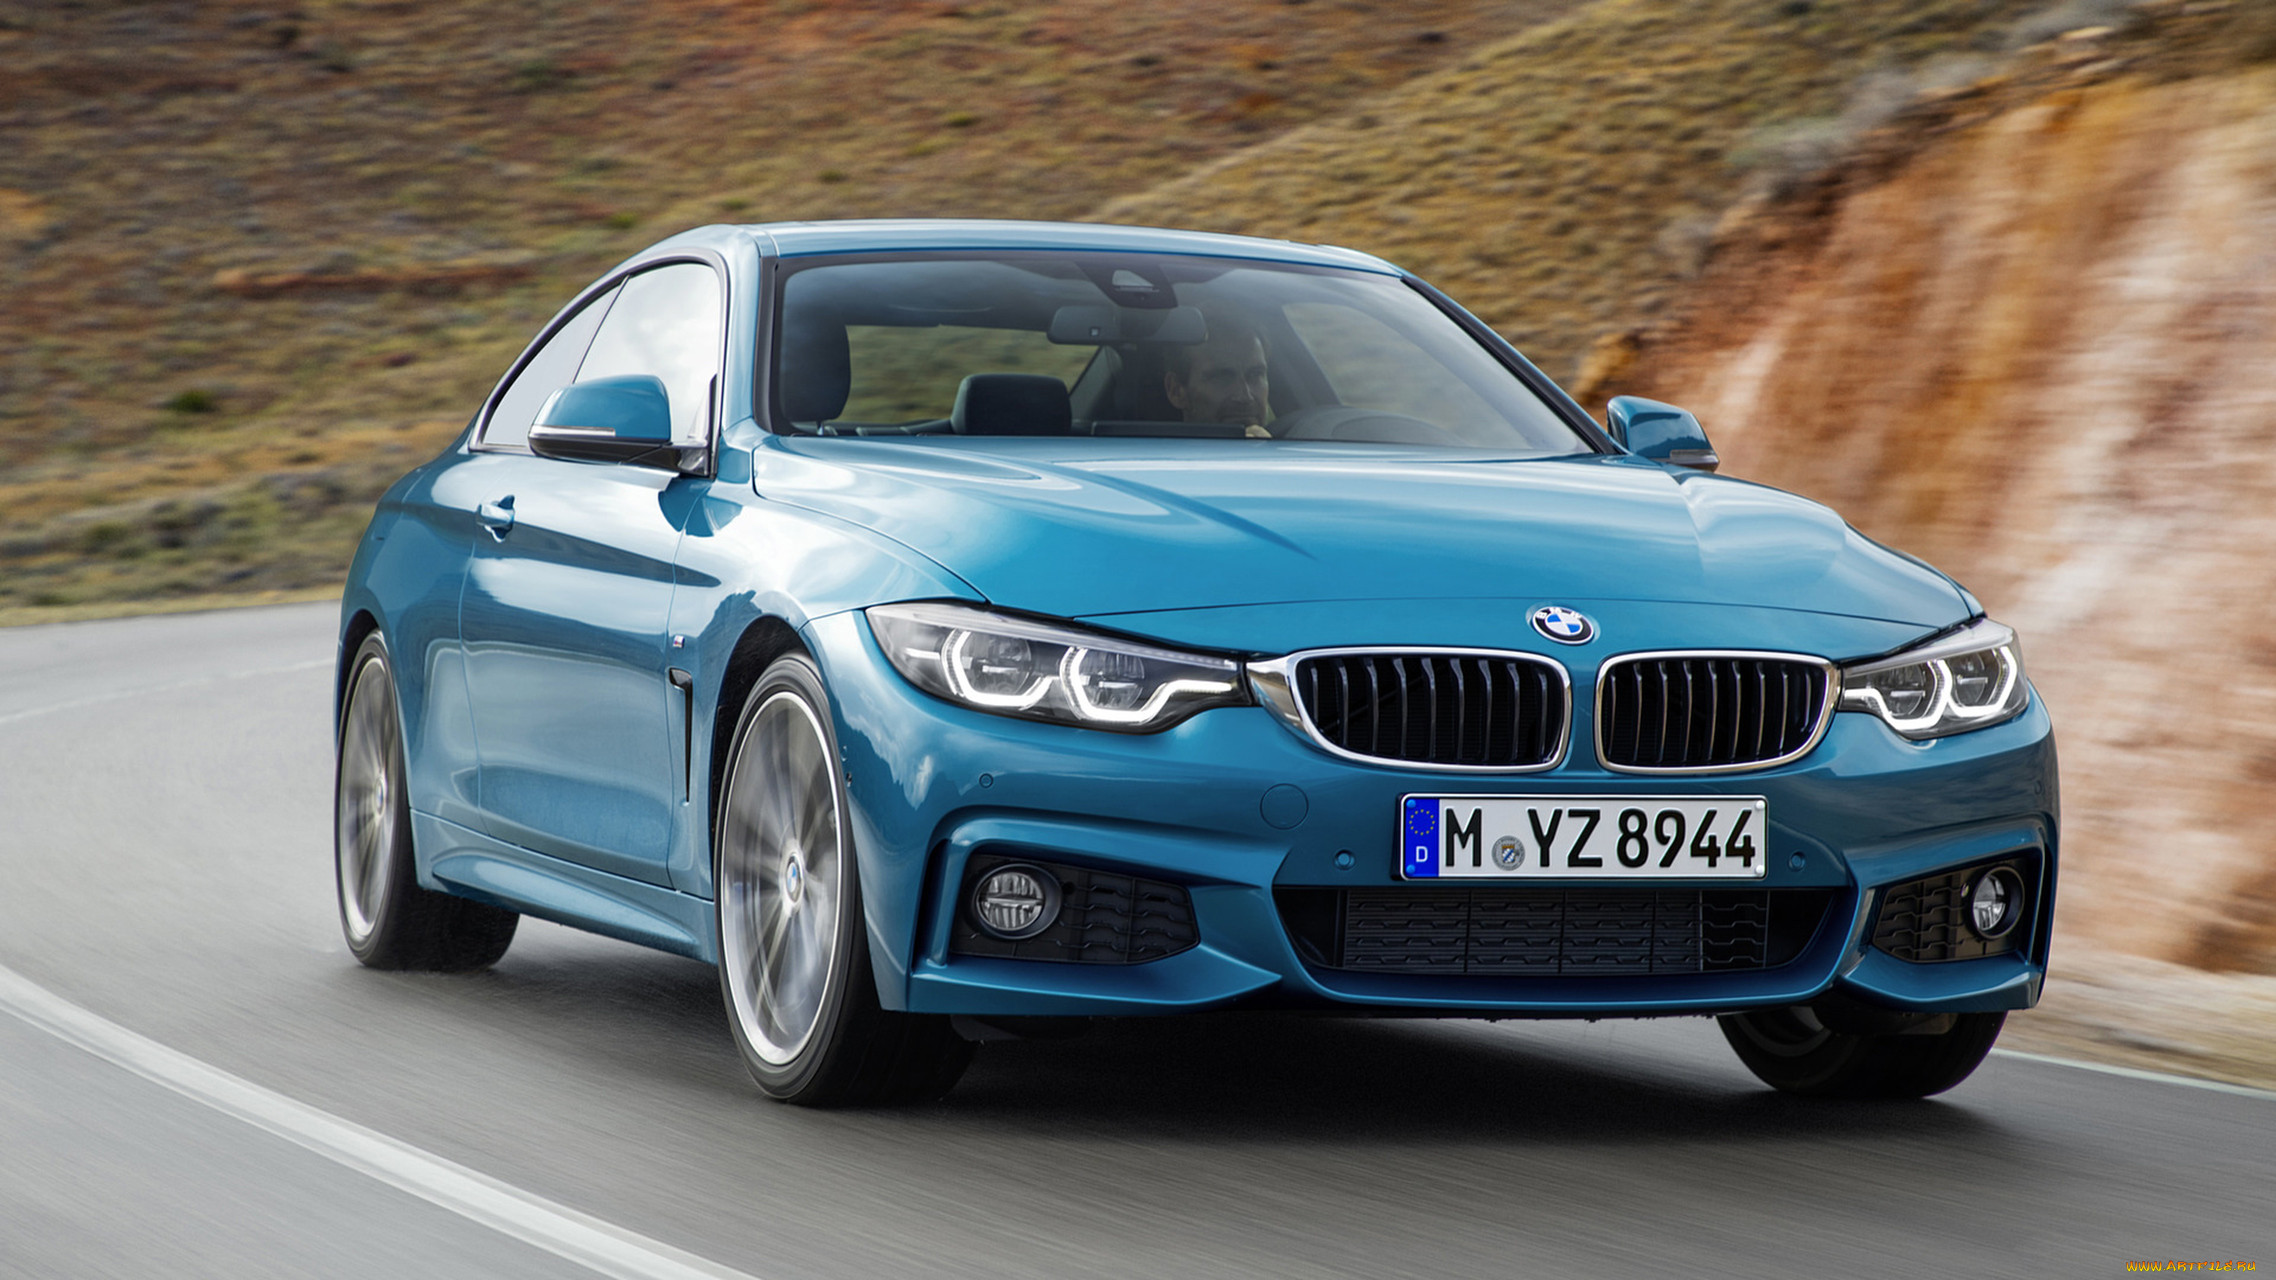 bmw 4 series coupe m sport 2018, , bmw, sport, m, 2018, coupe, series, 4